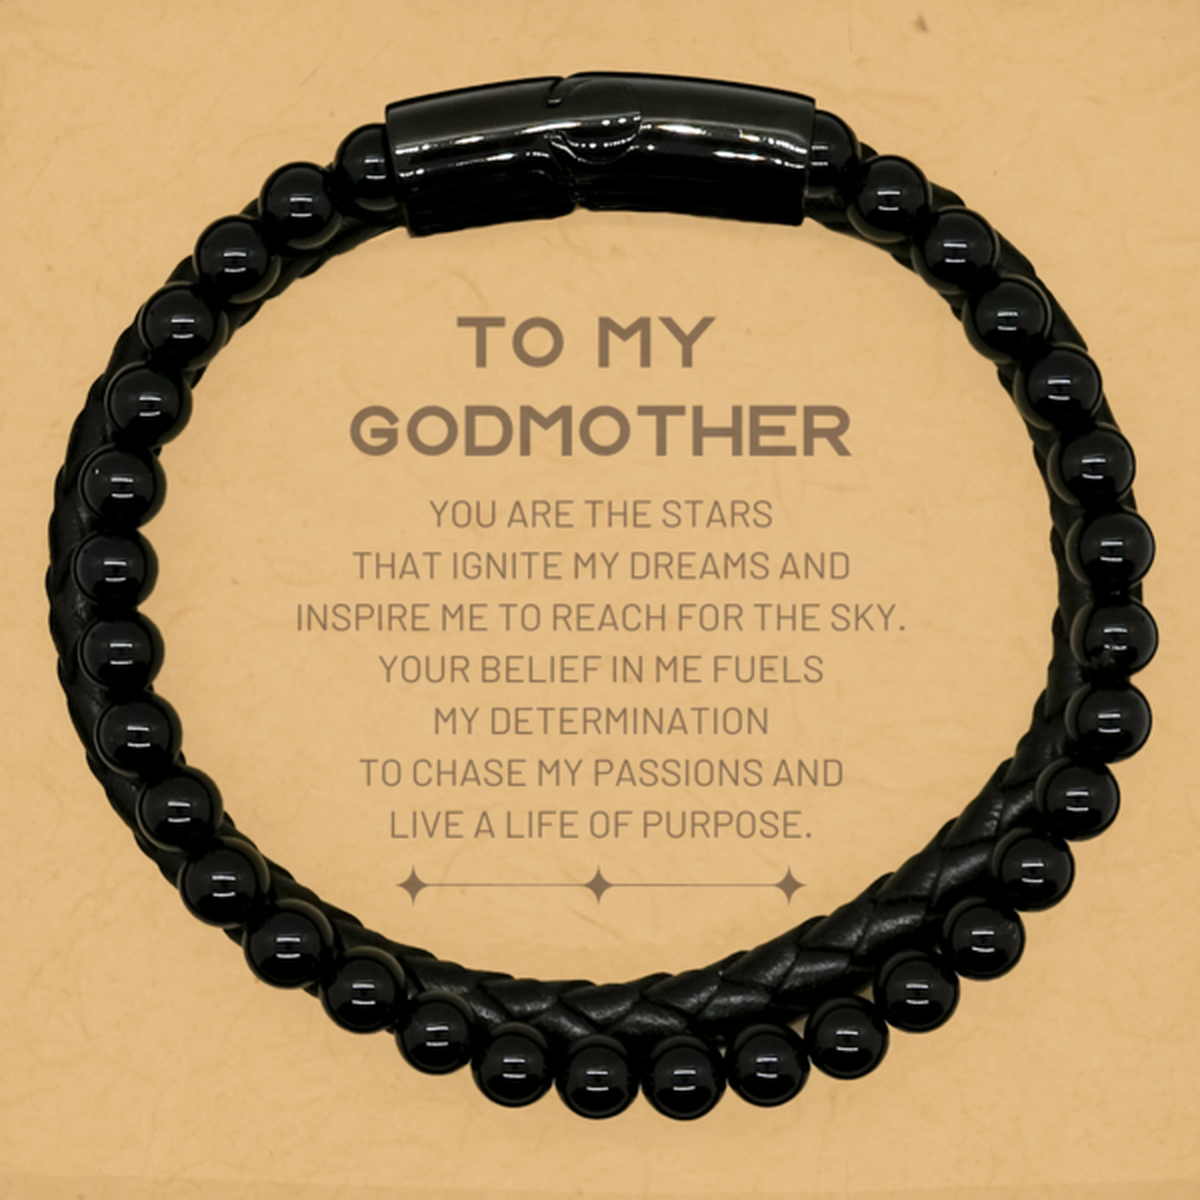 To My Godmother Stone Leather Bracelets, You are the stars that ignite my dreams and inspire me to reach for the sky, Birthday Unique Gifts For Godmother, Thank You Gifts For Godmother